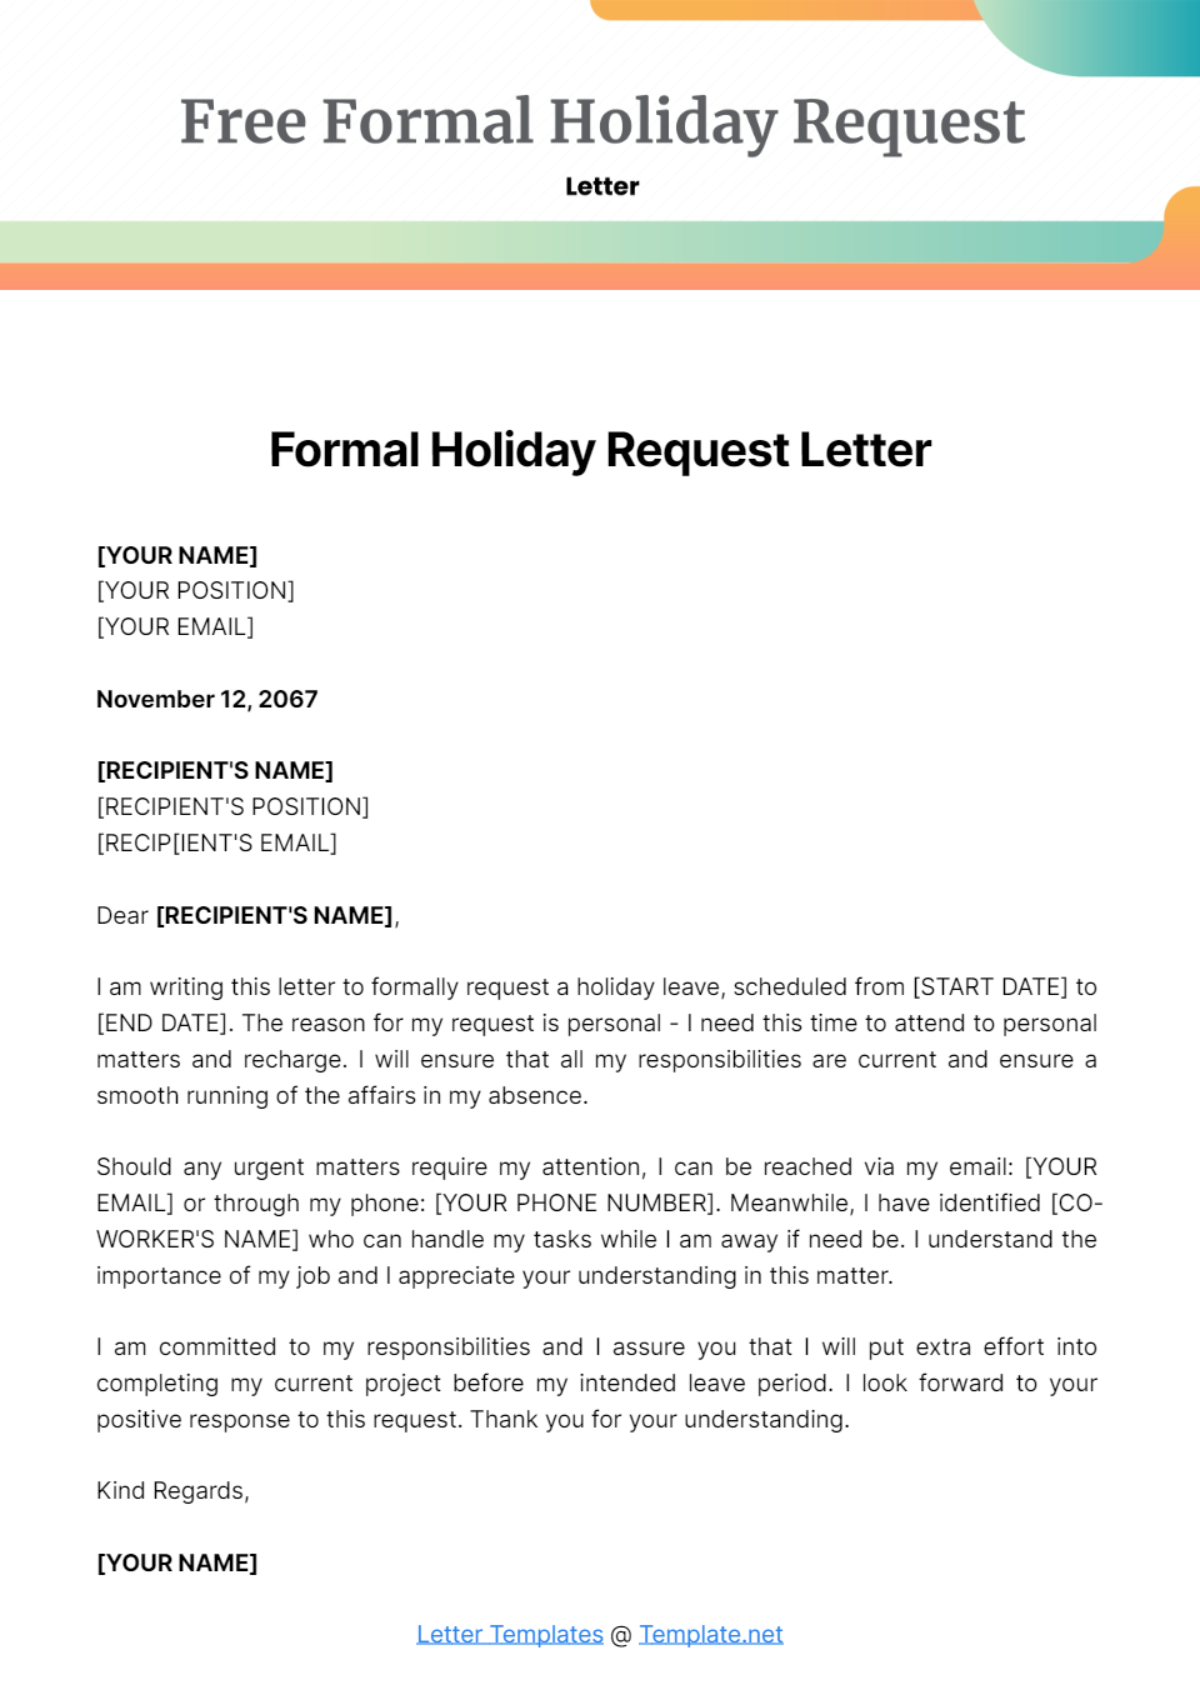 Free Formal Holiday Request Letter Template